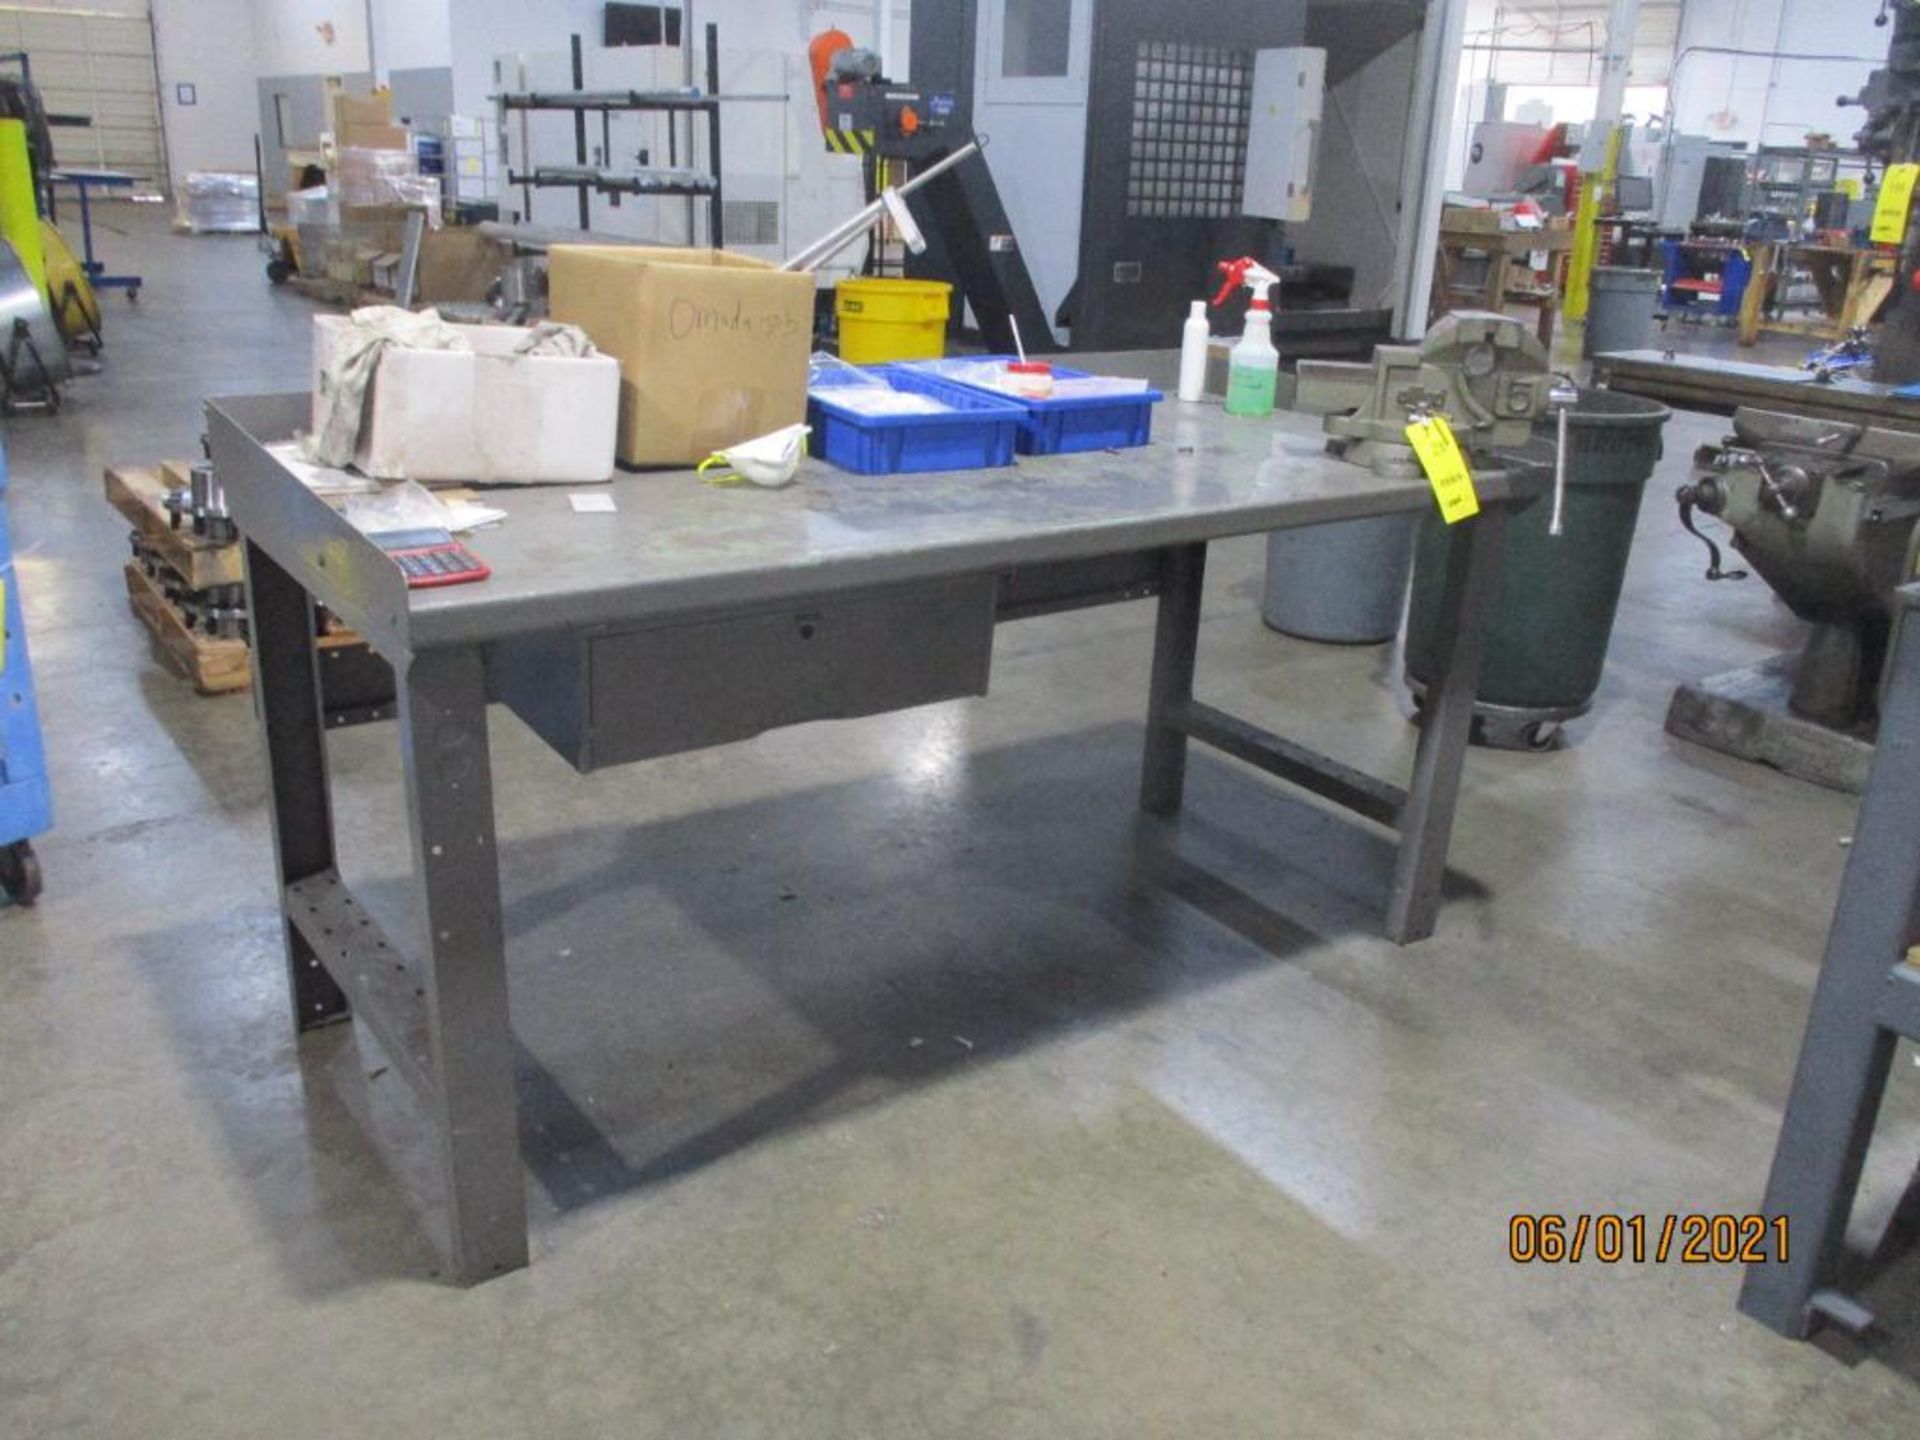 Steel Fabricated Work Table w/Mounted Vise, 72 in. x 34 in x 34 in. deep